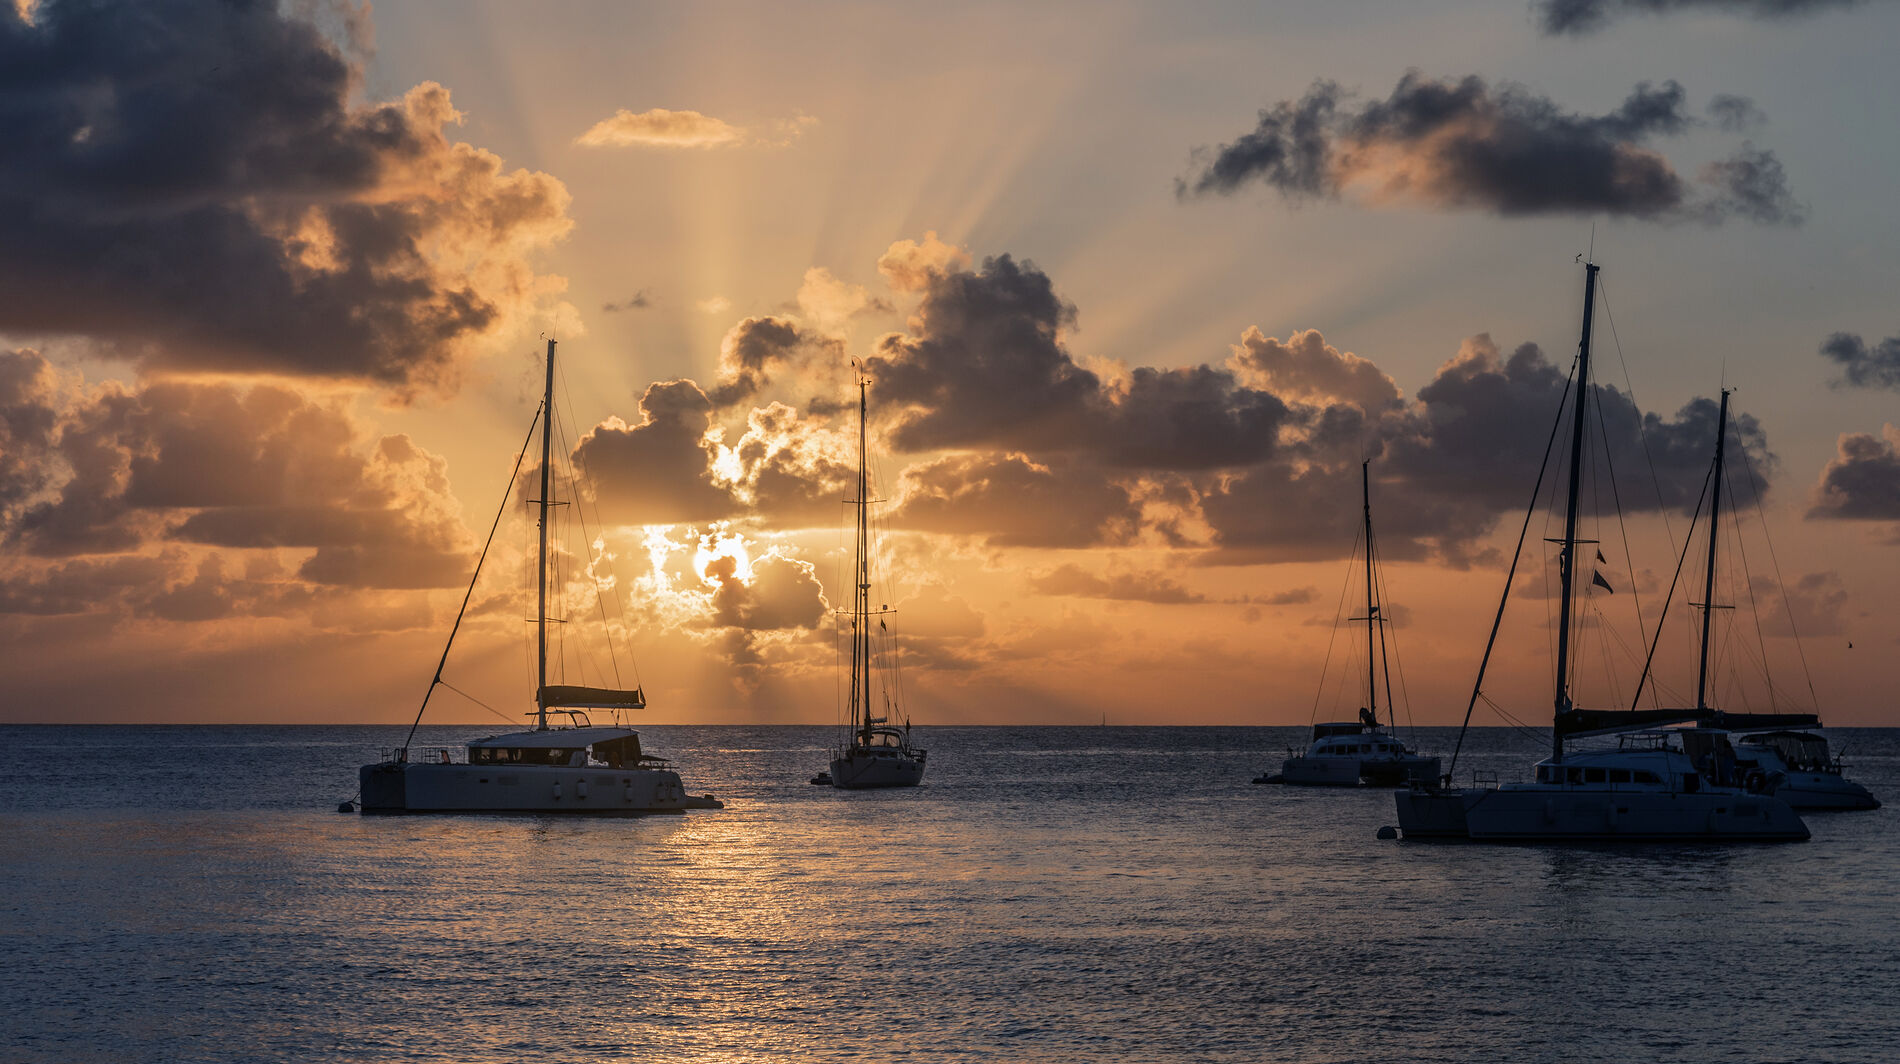 yachts anchored during sunset